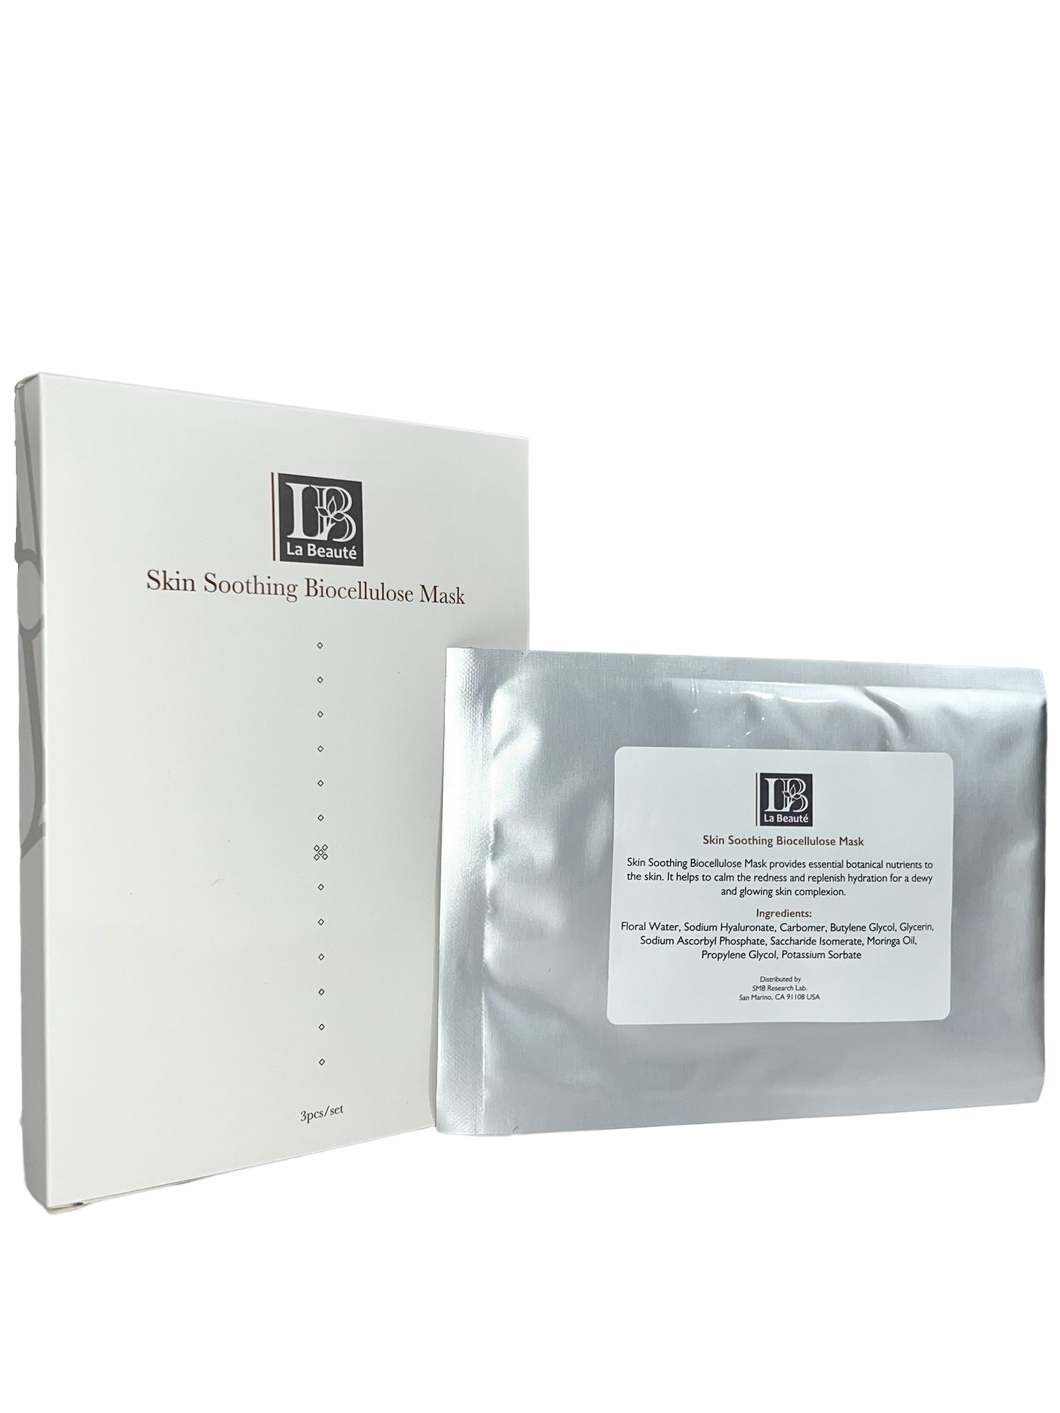 La Beaute Skin Soothing Bio Cellulose Mask WSP